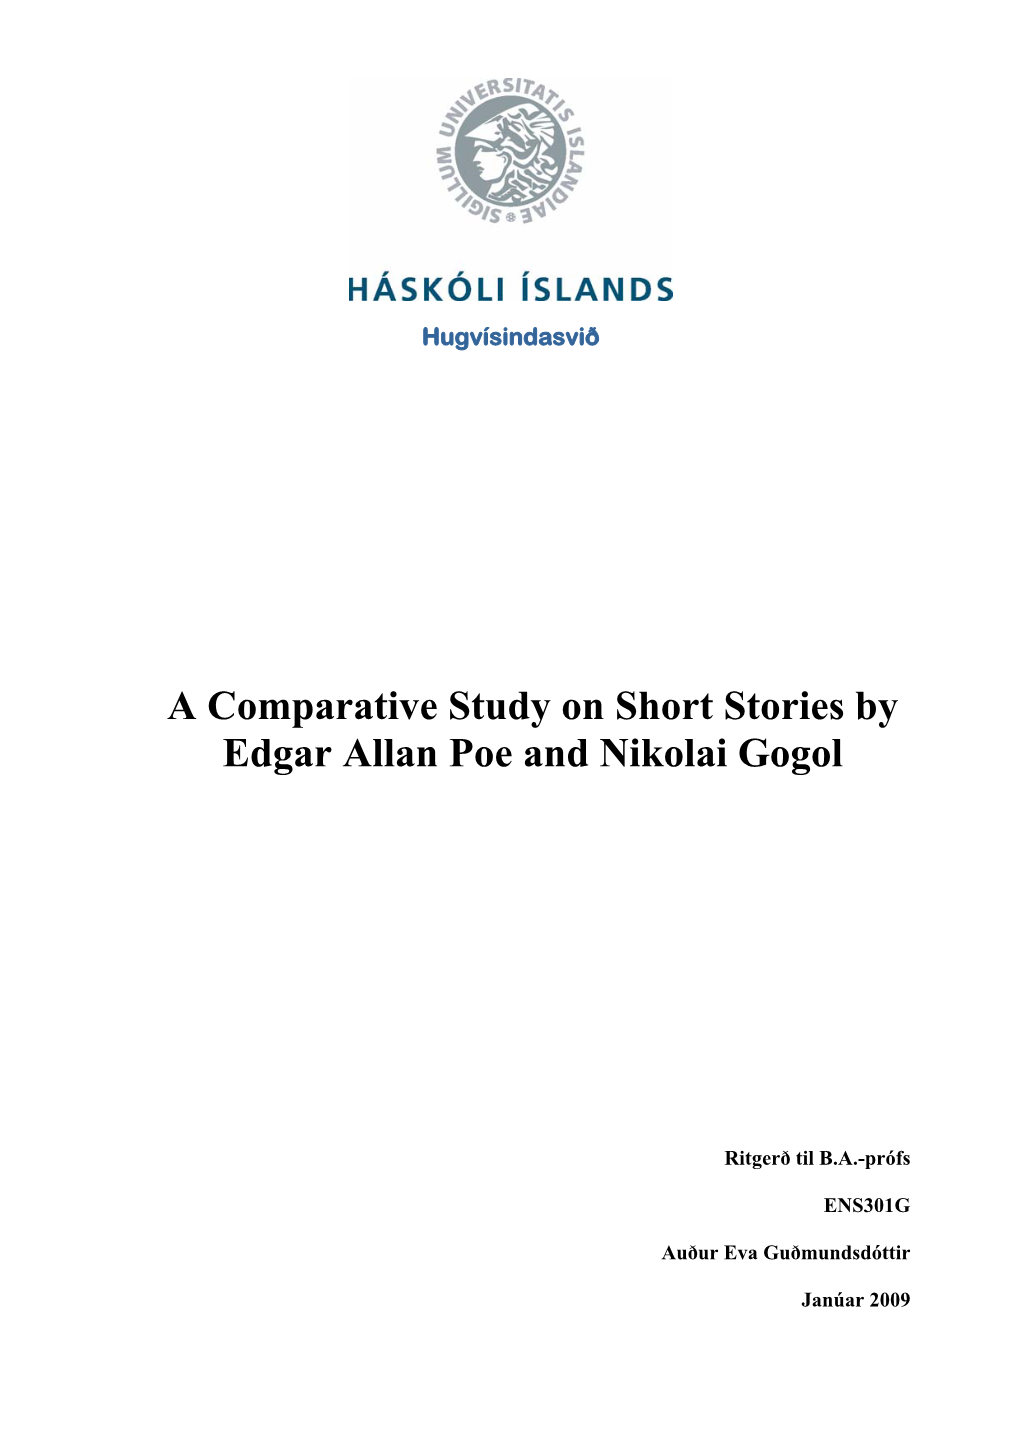 A Comparative Study on Short Stories by Edgar Allan Poe and Nikolai Gogol